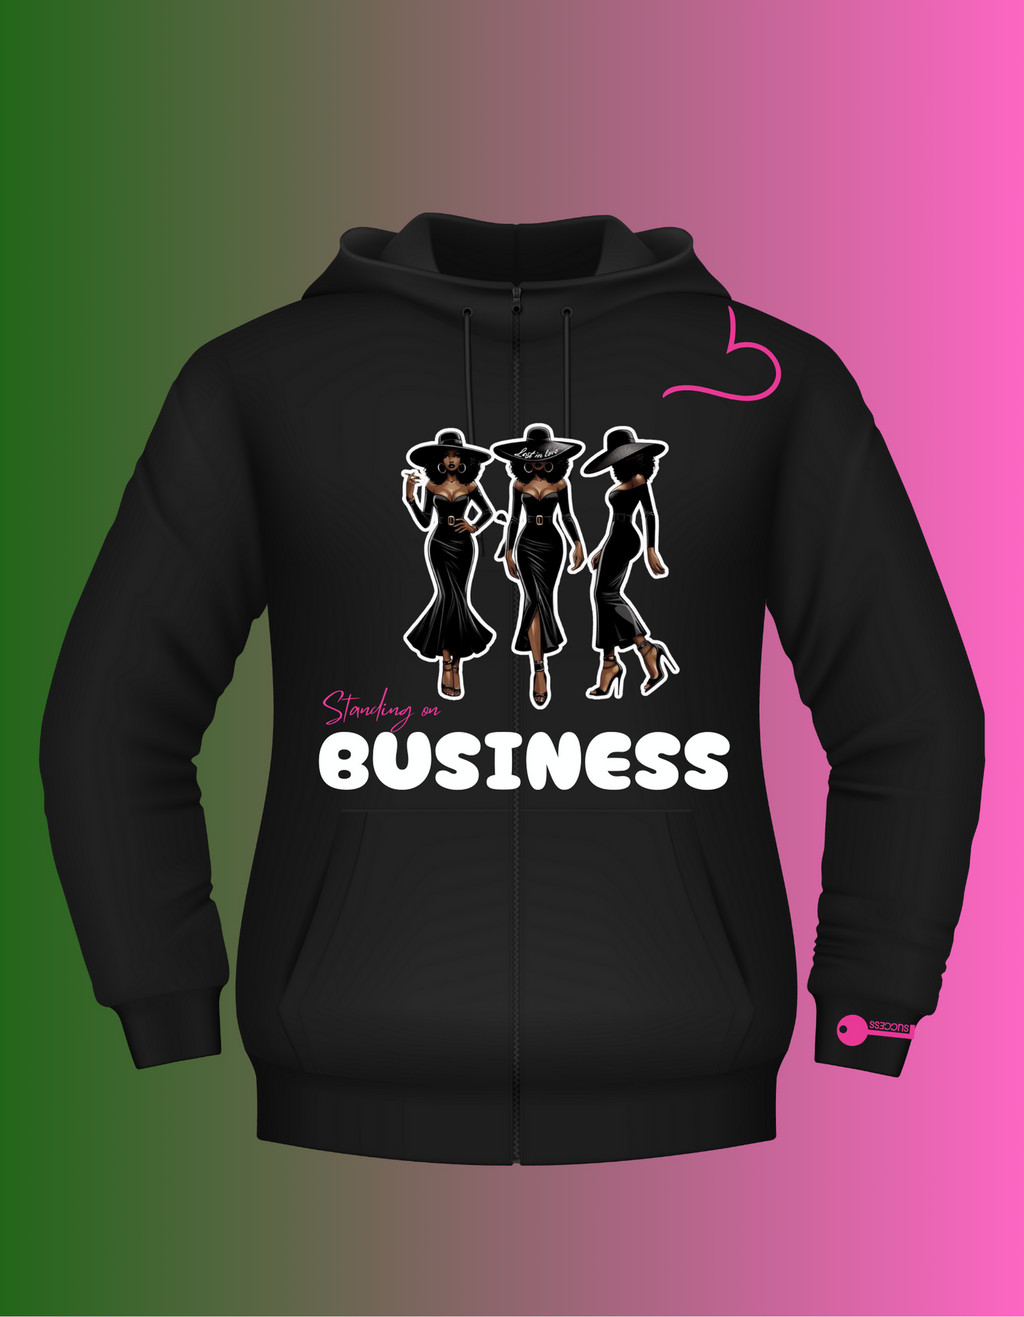 Standing On Business|100 Percent Cotton Hoodie